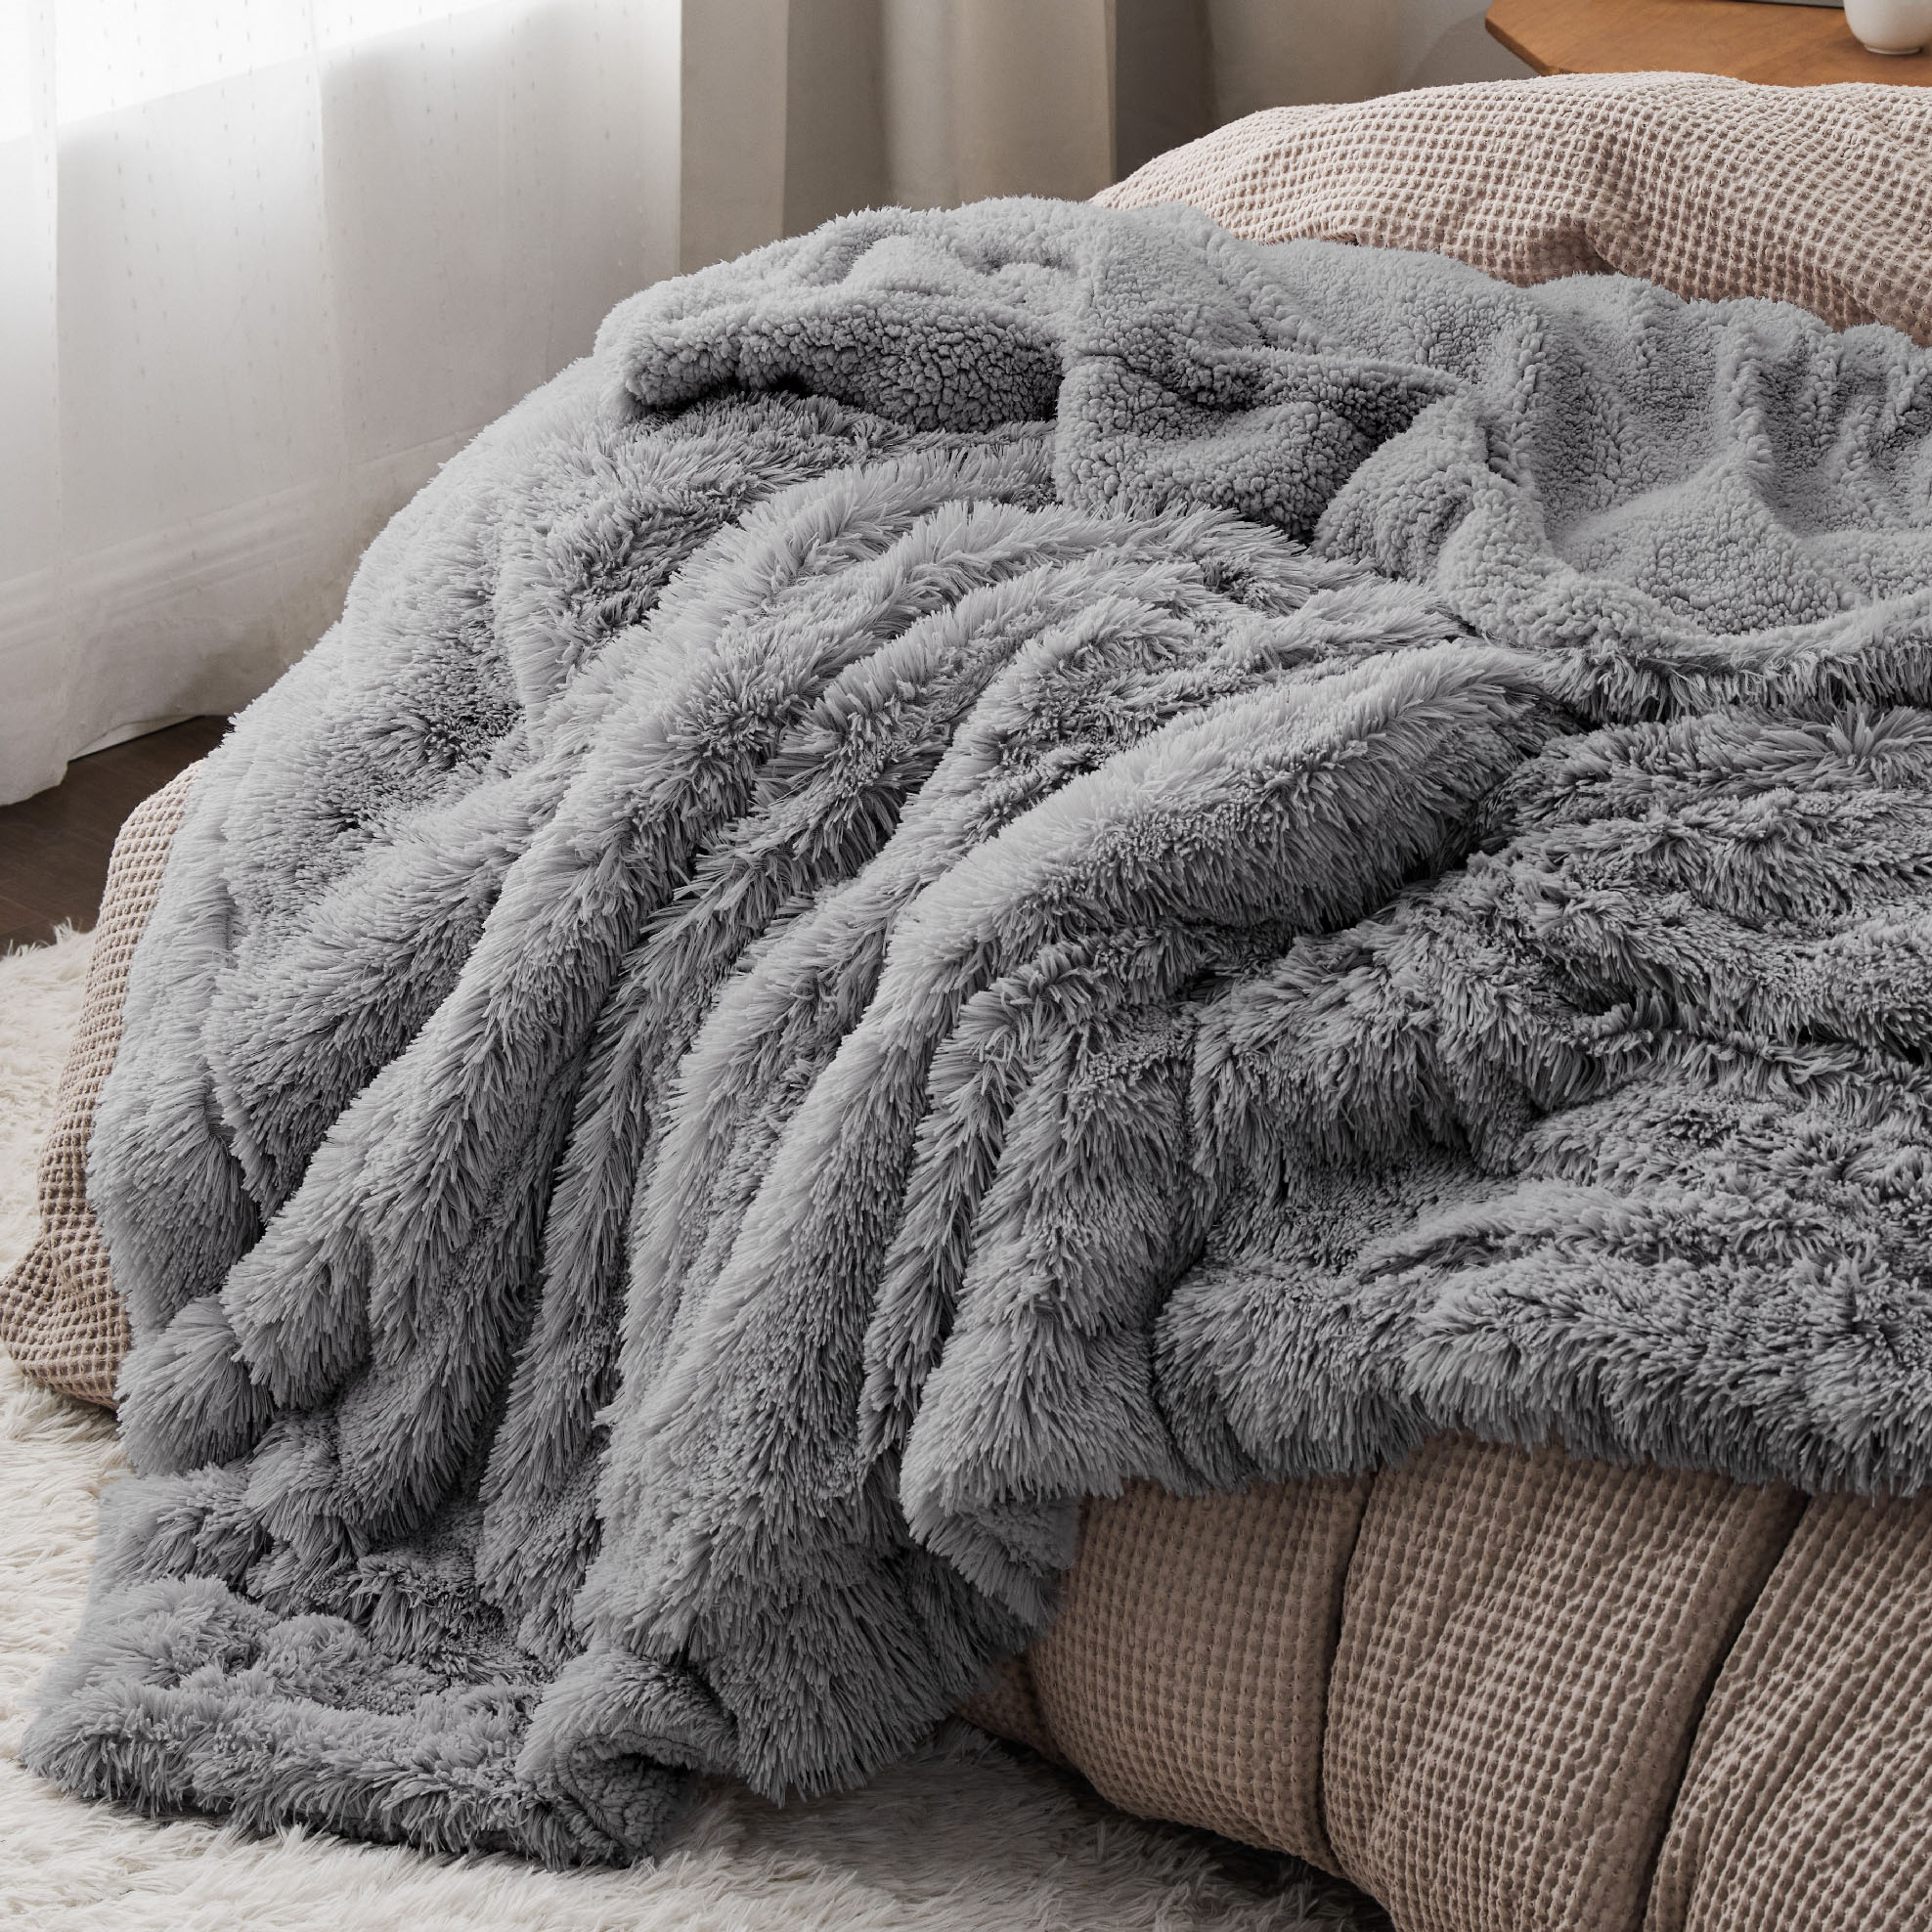  Bedsure Fleece Blankets Twin Size Grey - 300GSM Lightweight  Plush Fuzzy Cozy Soft Twin Blanket for Bed, Sofa, Couch, Travel, Camping,  60x80 inches : Home & Kitchen